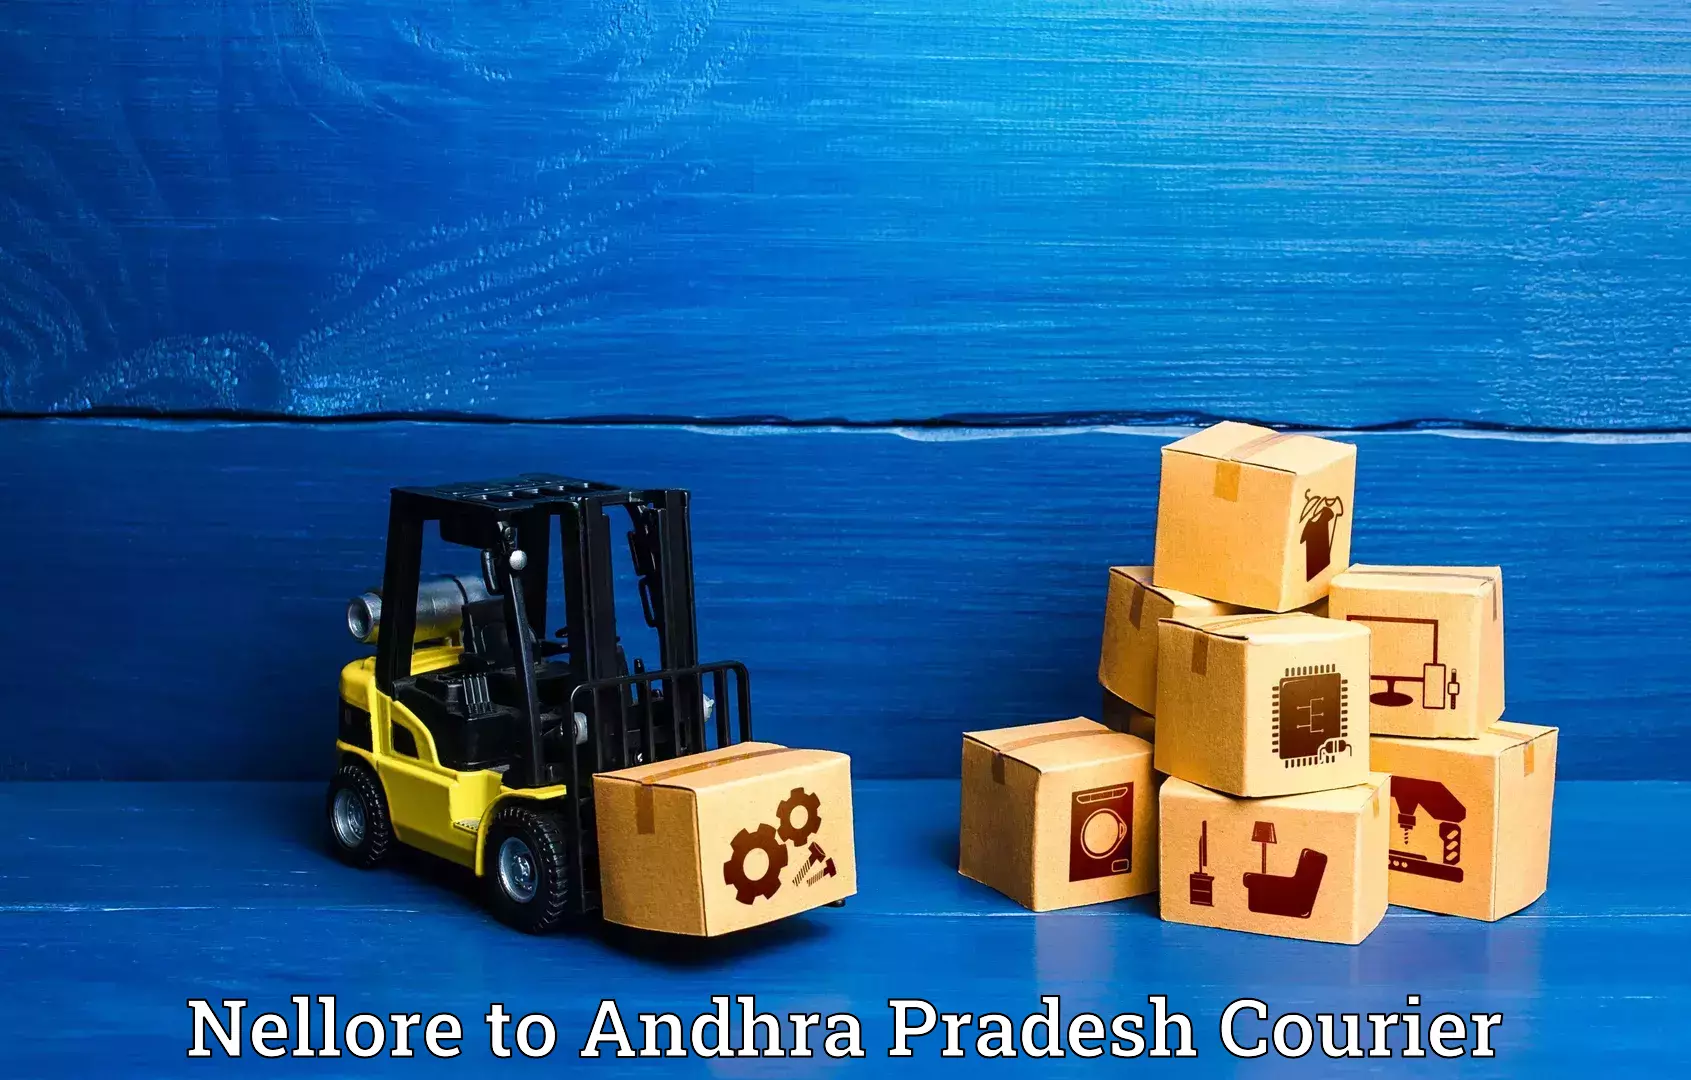 Luggage delivery app Nellore to Andhra Pradesh